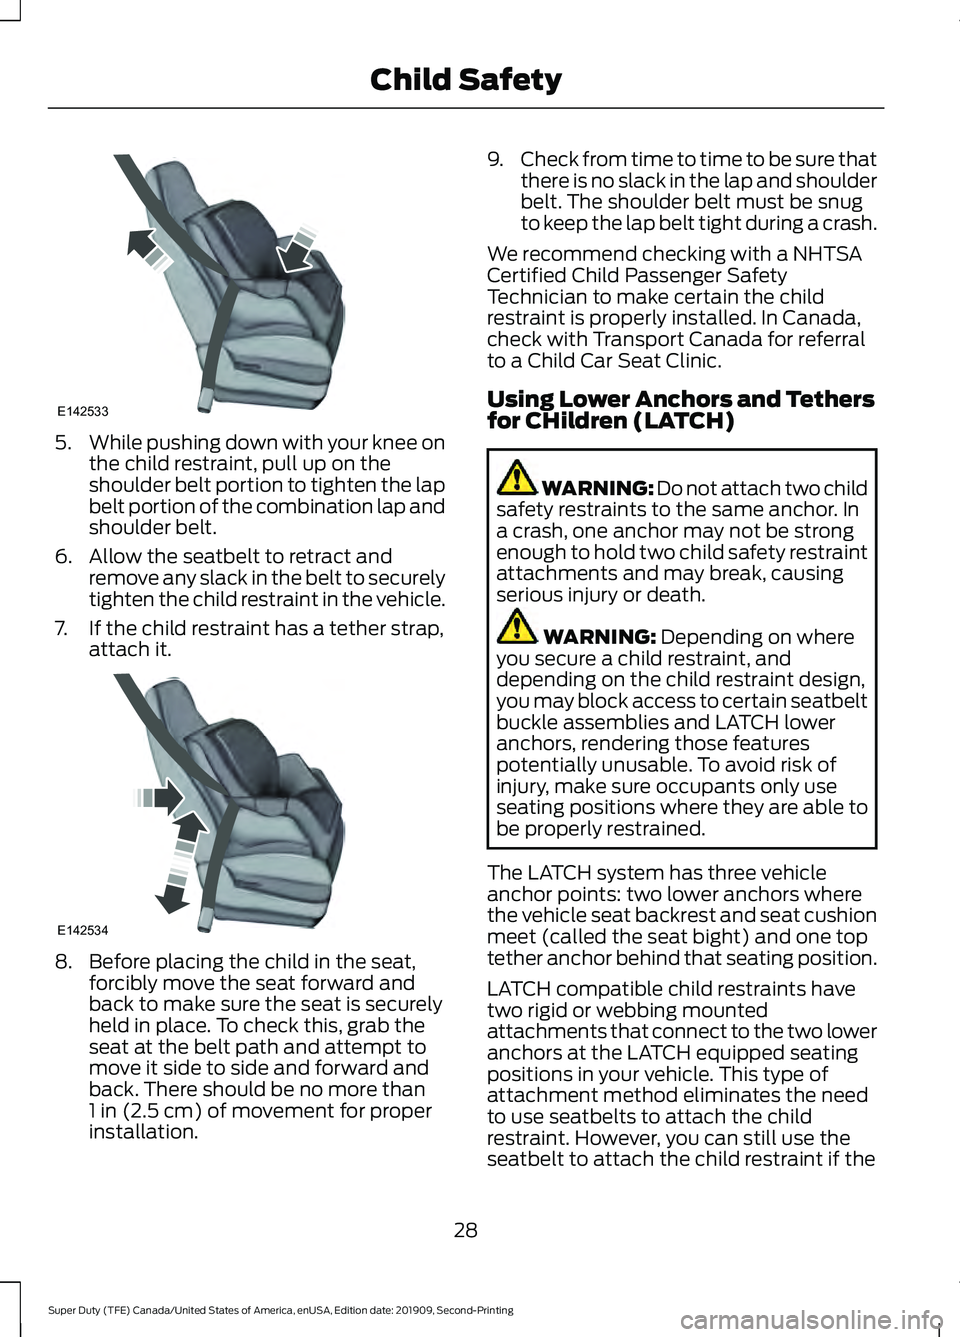 FORD F250 SUPER DUTY 2020  Owners Manual 5.
While pushing down with your knee on
the child restraint, pull up on the
shoulder belt portion to tighten the lap
belt portion of the combination lap and
shoulder belt.
6. Allow the seatbelt to ret